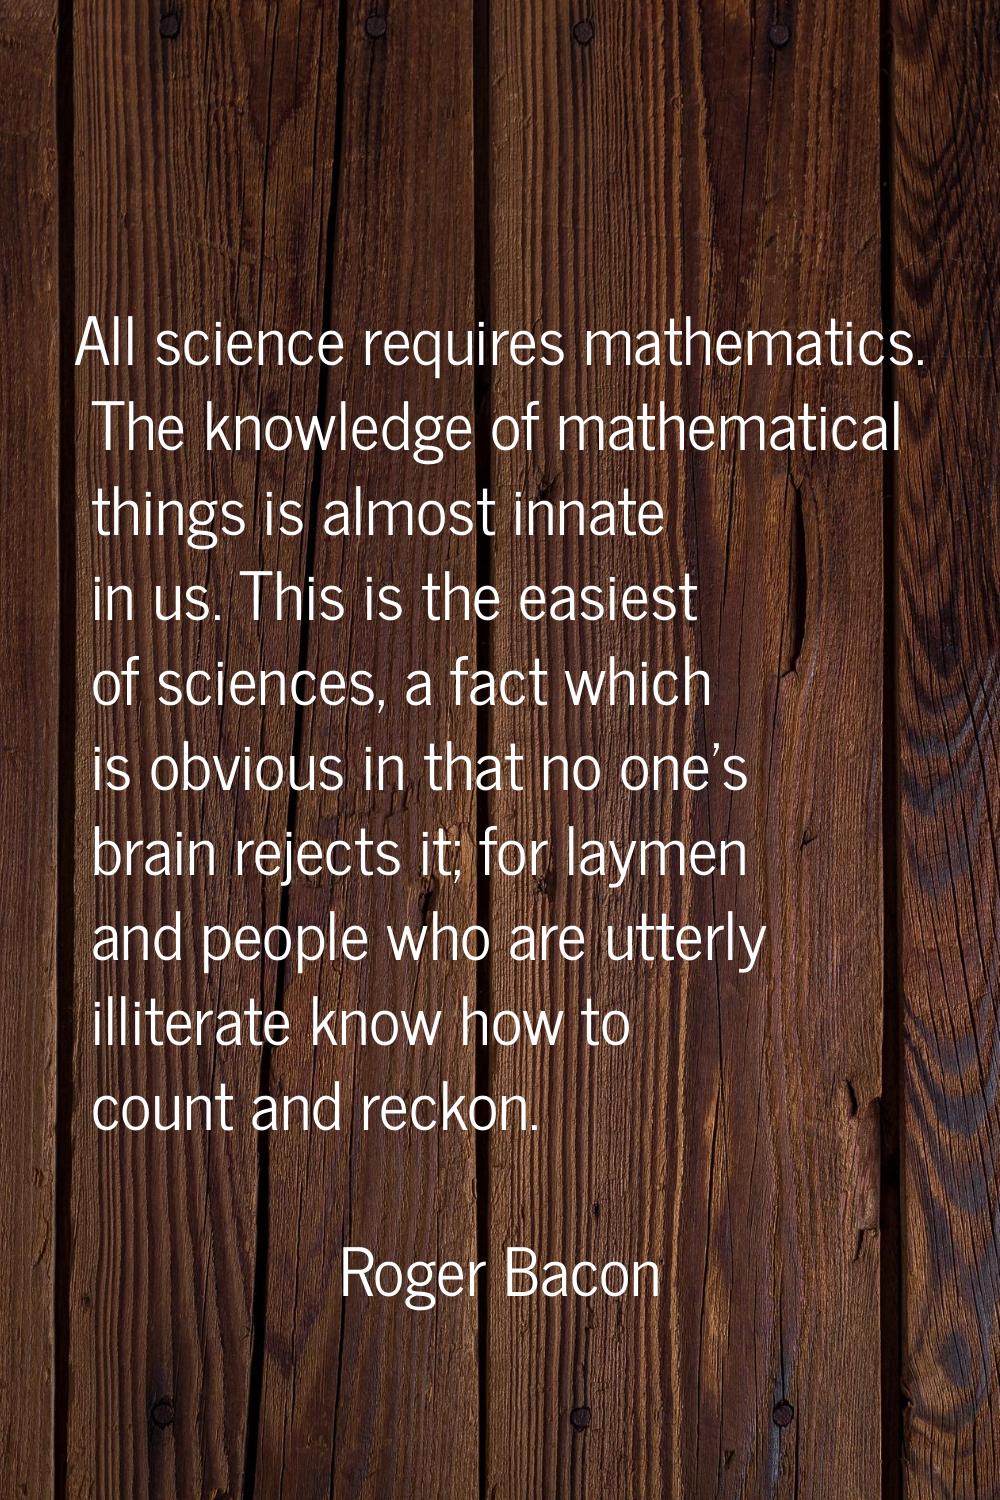 All science requires mathematics. The knowledge of mathematical things is almost innate in us. This